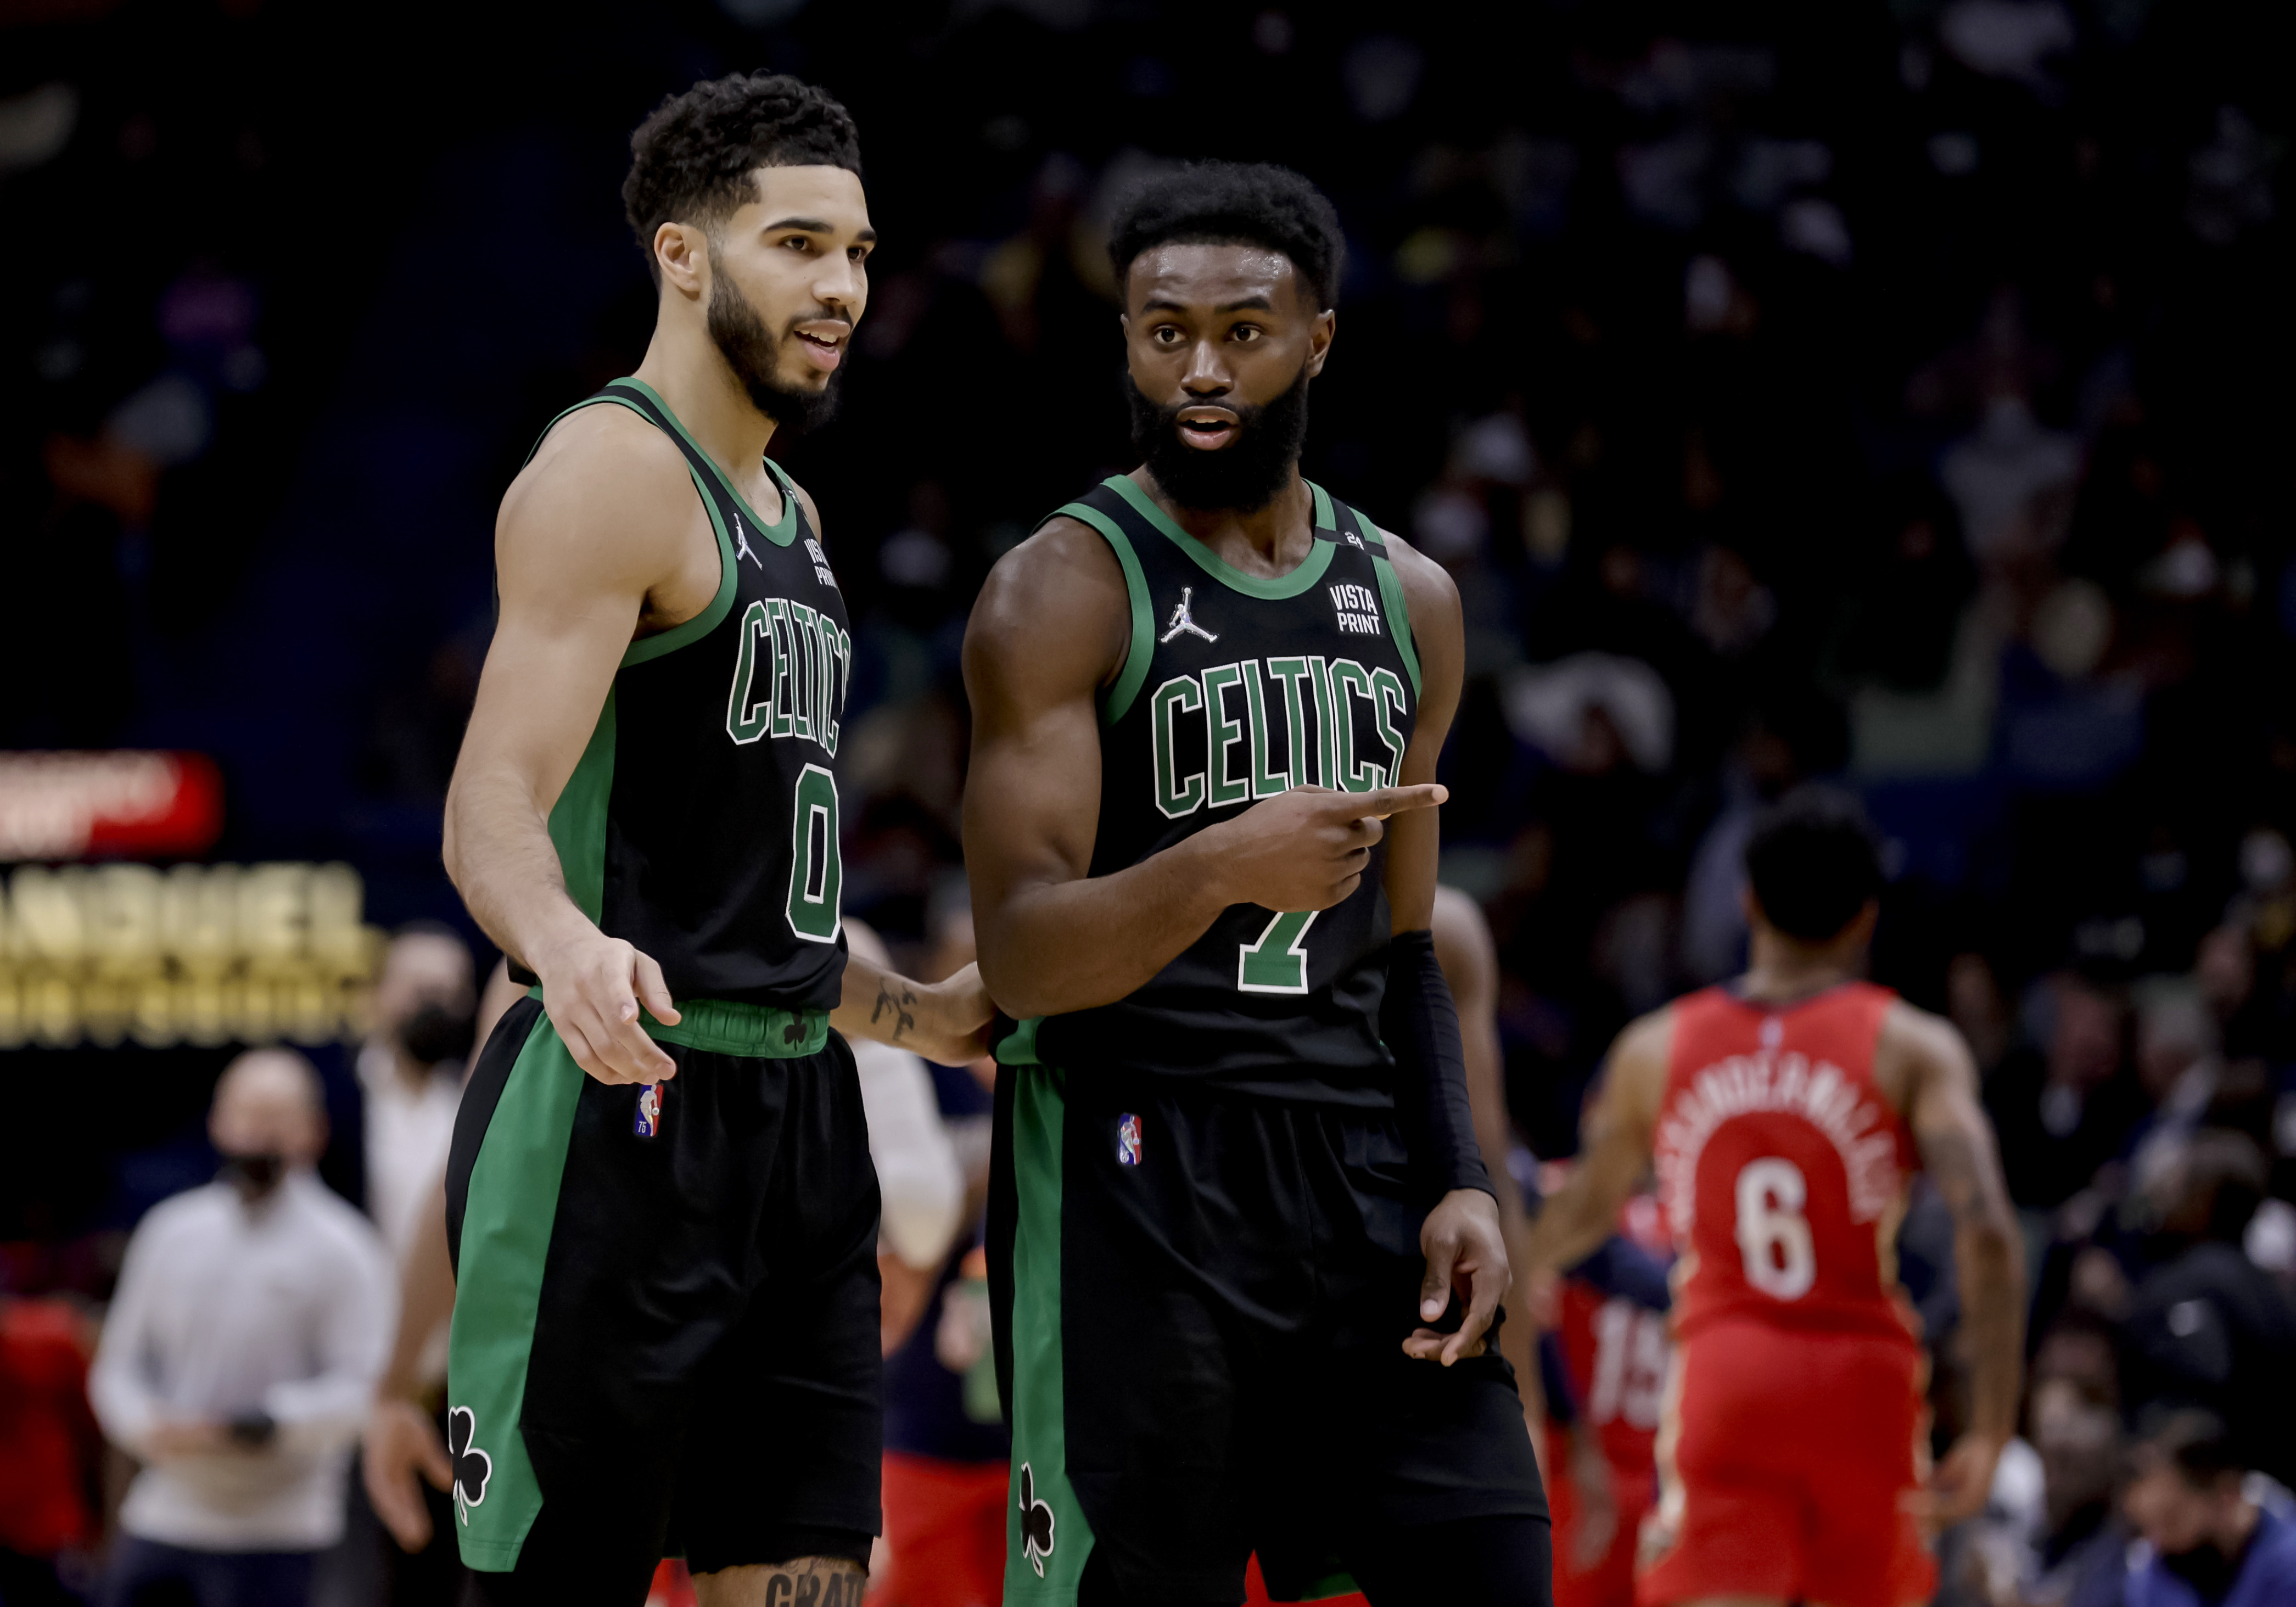 Game Or Not, Celtics' Jaylen Brown Will Be An All-Star This Year